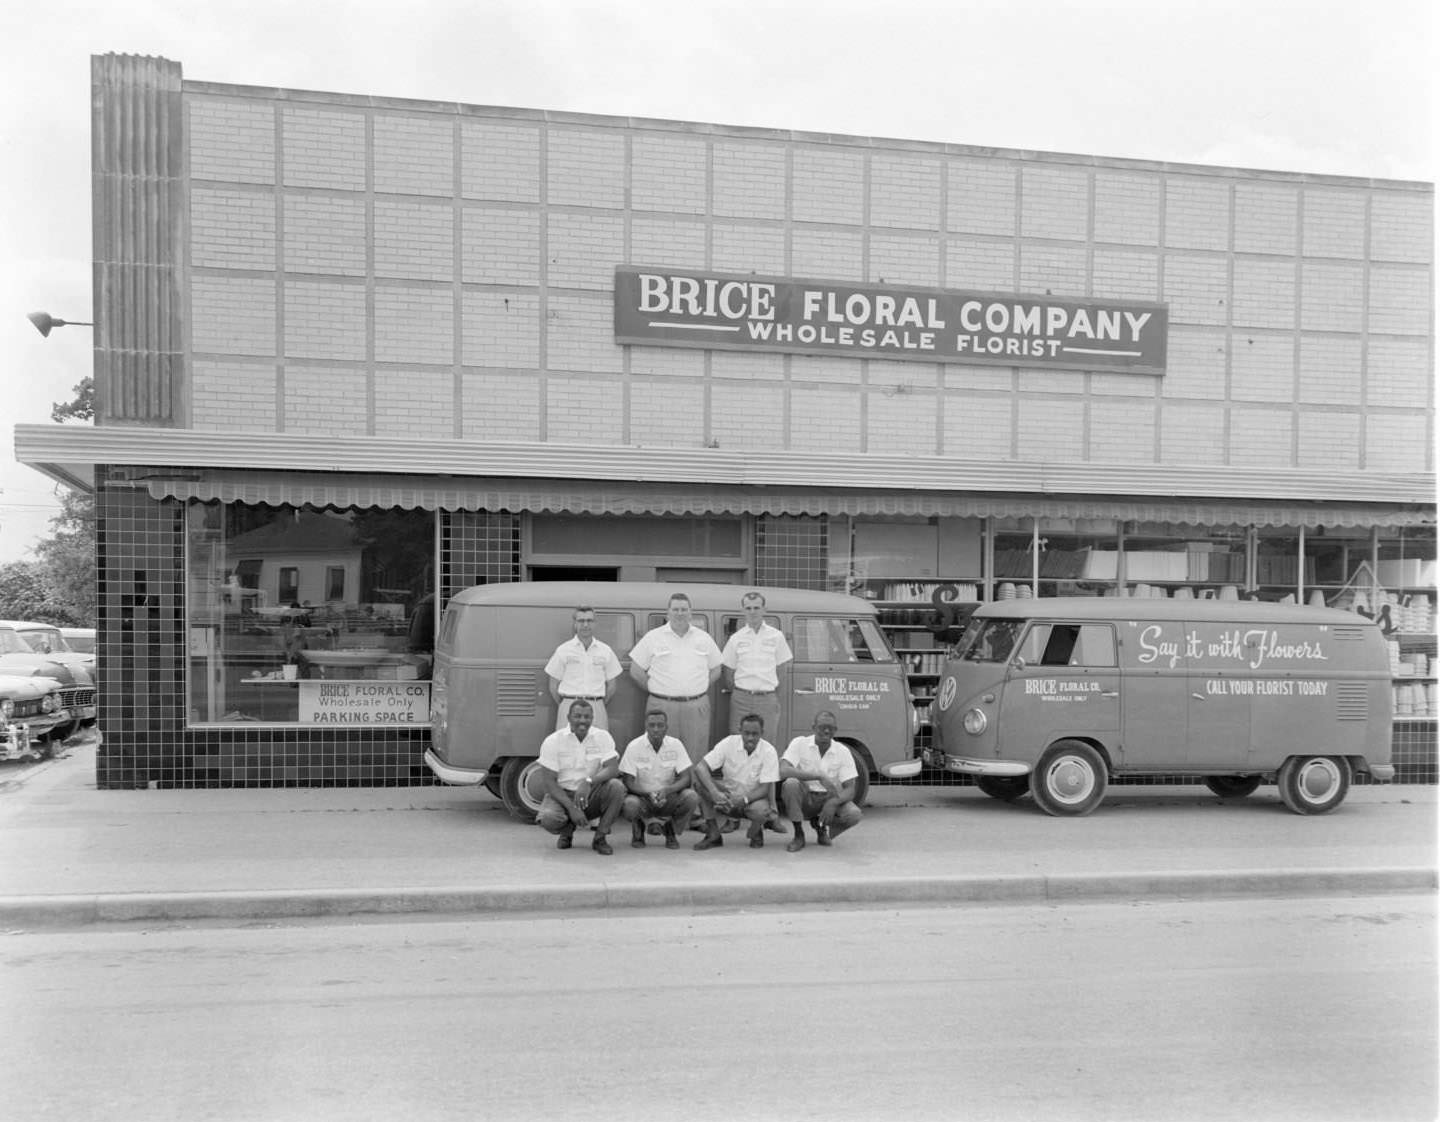 Men posing in front of vans with Brice Floral Company in background. Austin, 1930